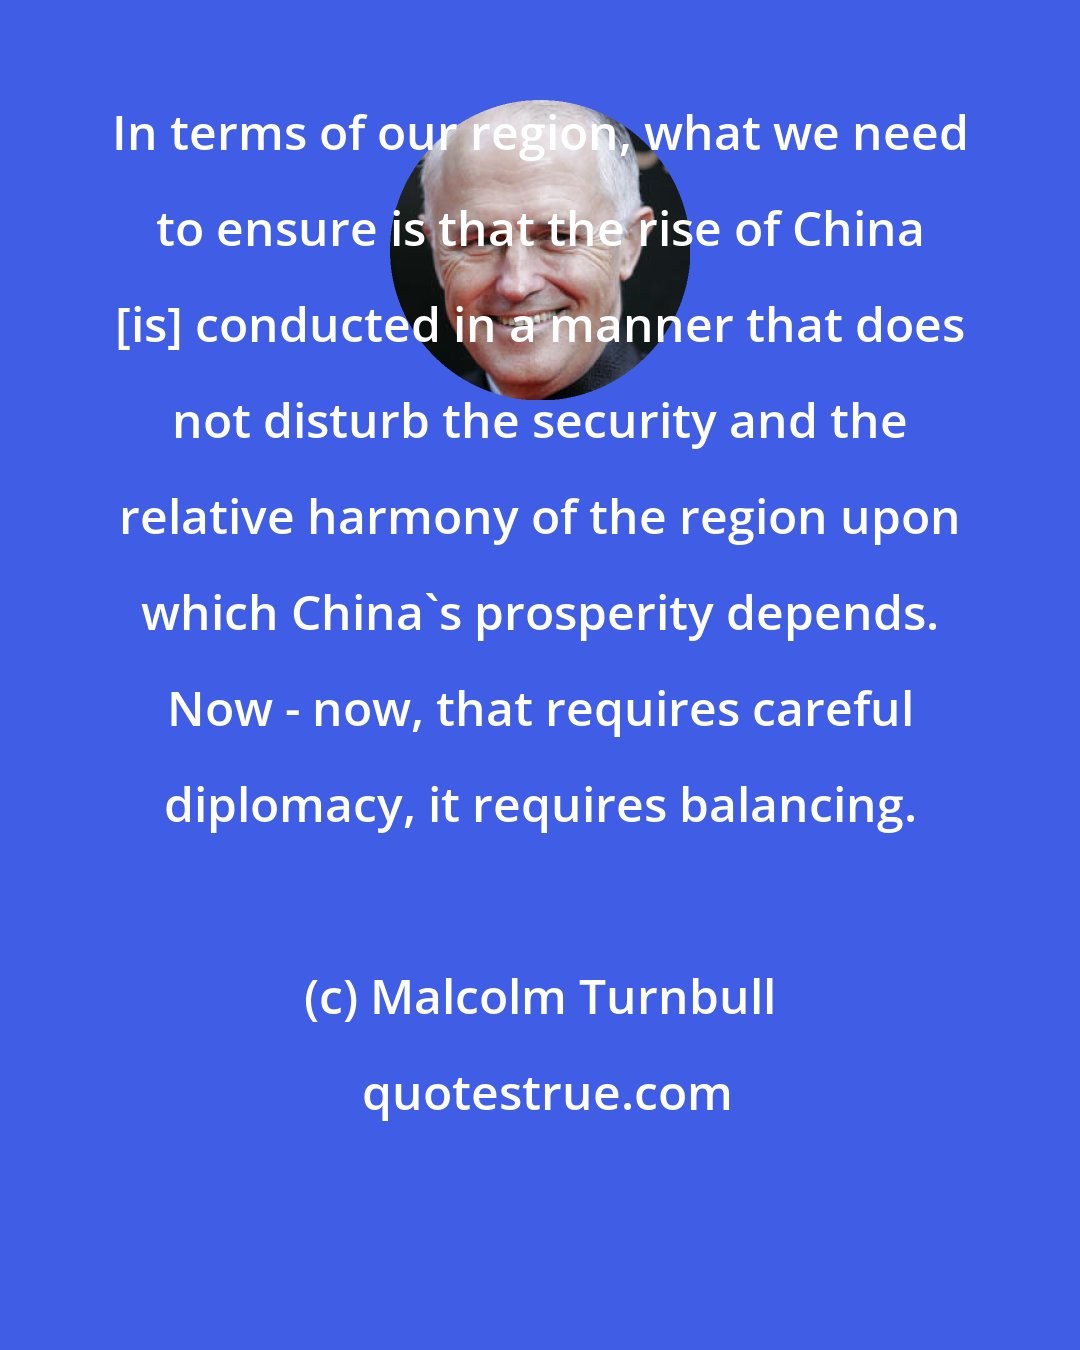 Malcolm Turnbull: In terms of our region, what we need to ensure is that the rise of China [is] conducted in a manner that does not disturb the security and the relative harmony of the region upon which China's prosperity depends. Now - now, that requires careful diplomacy, it requires balancing.